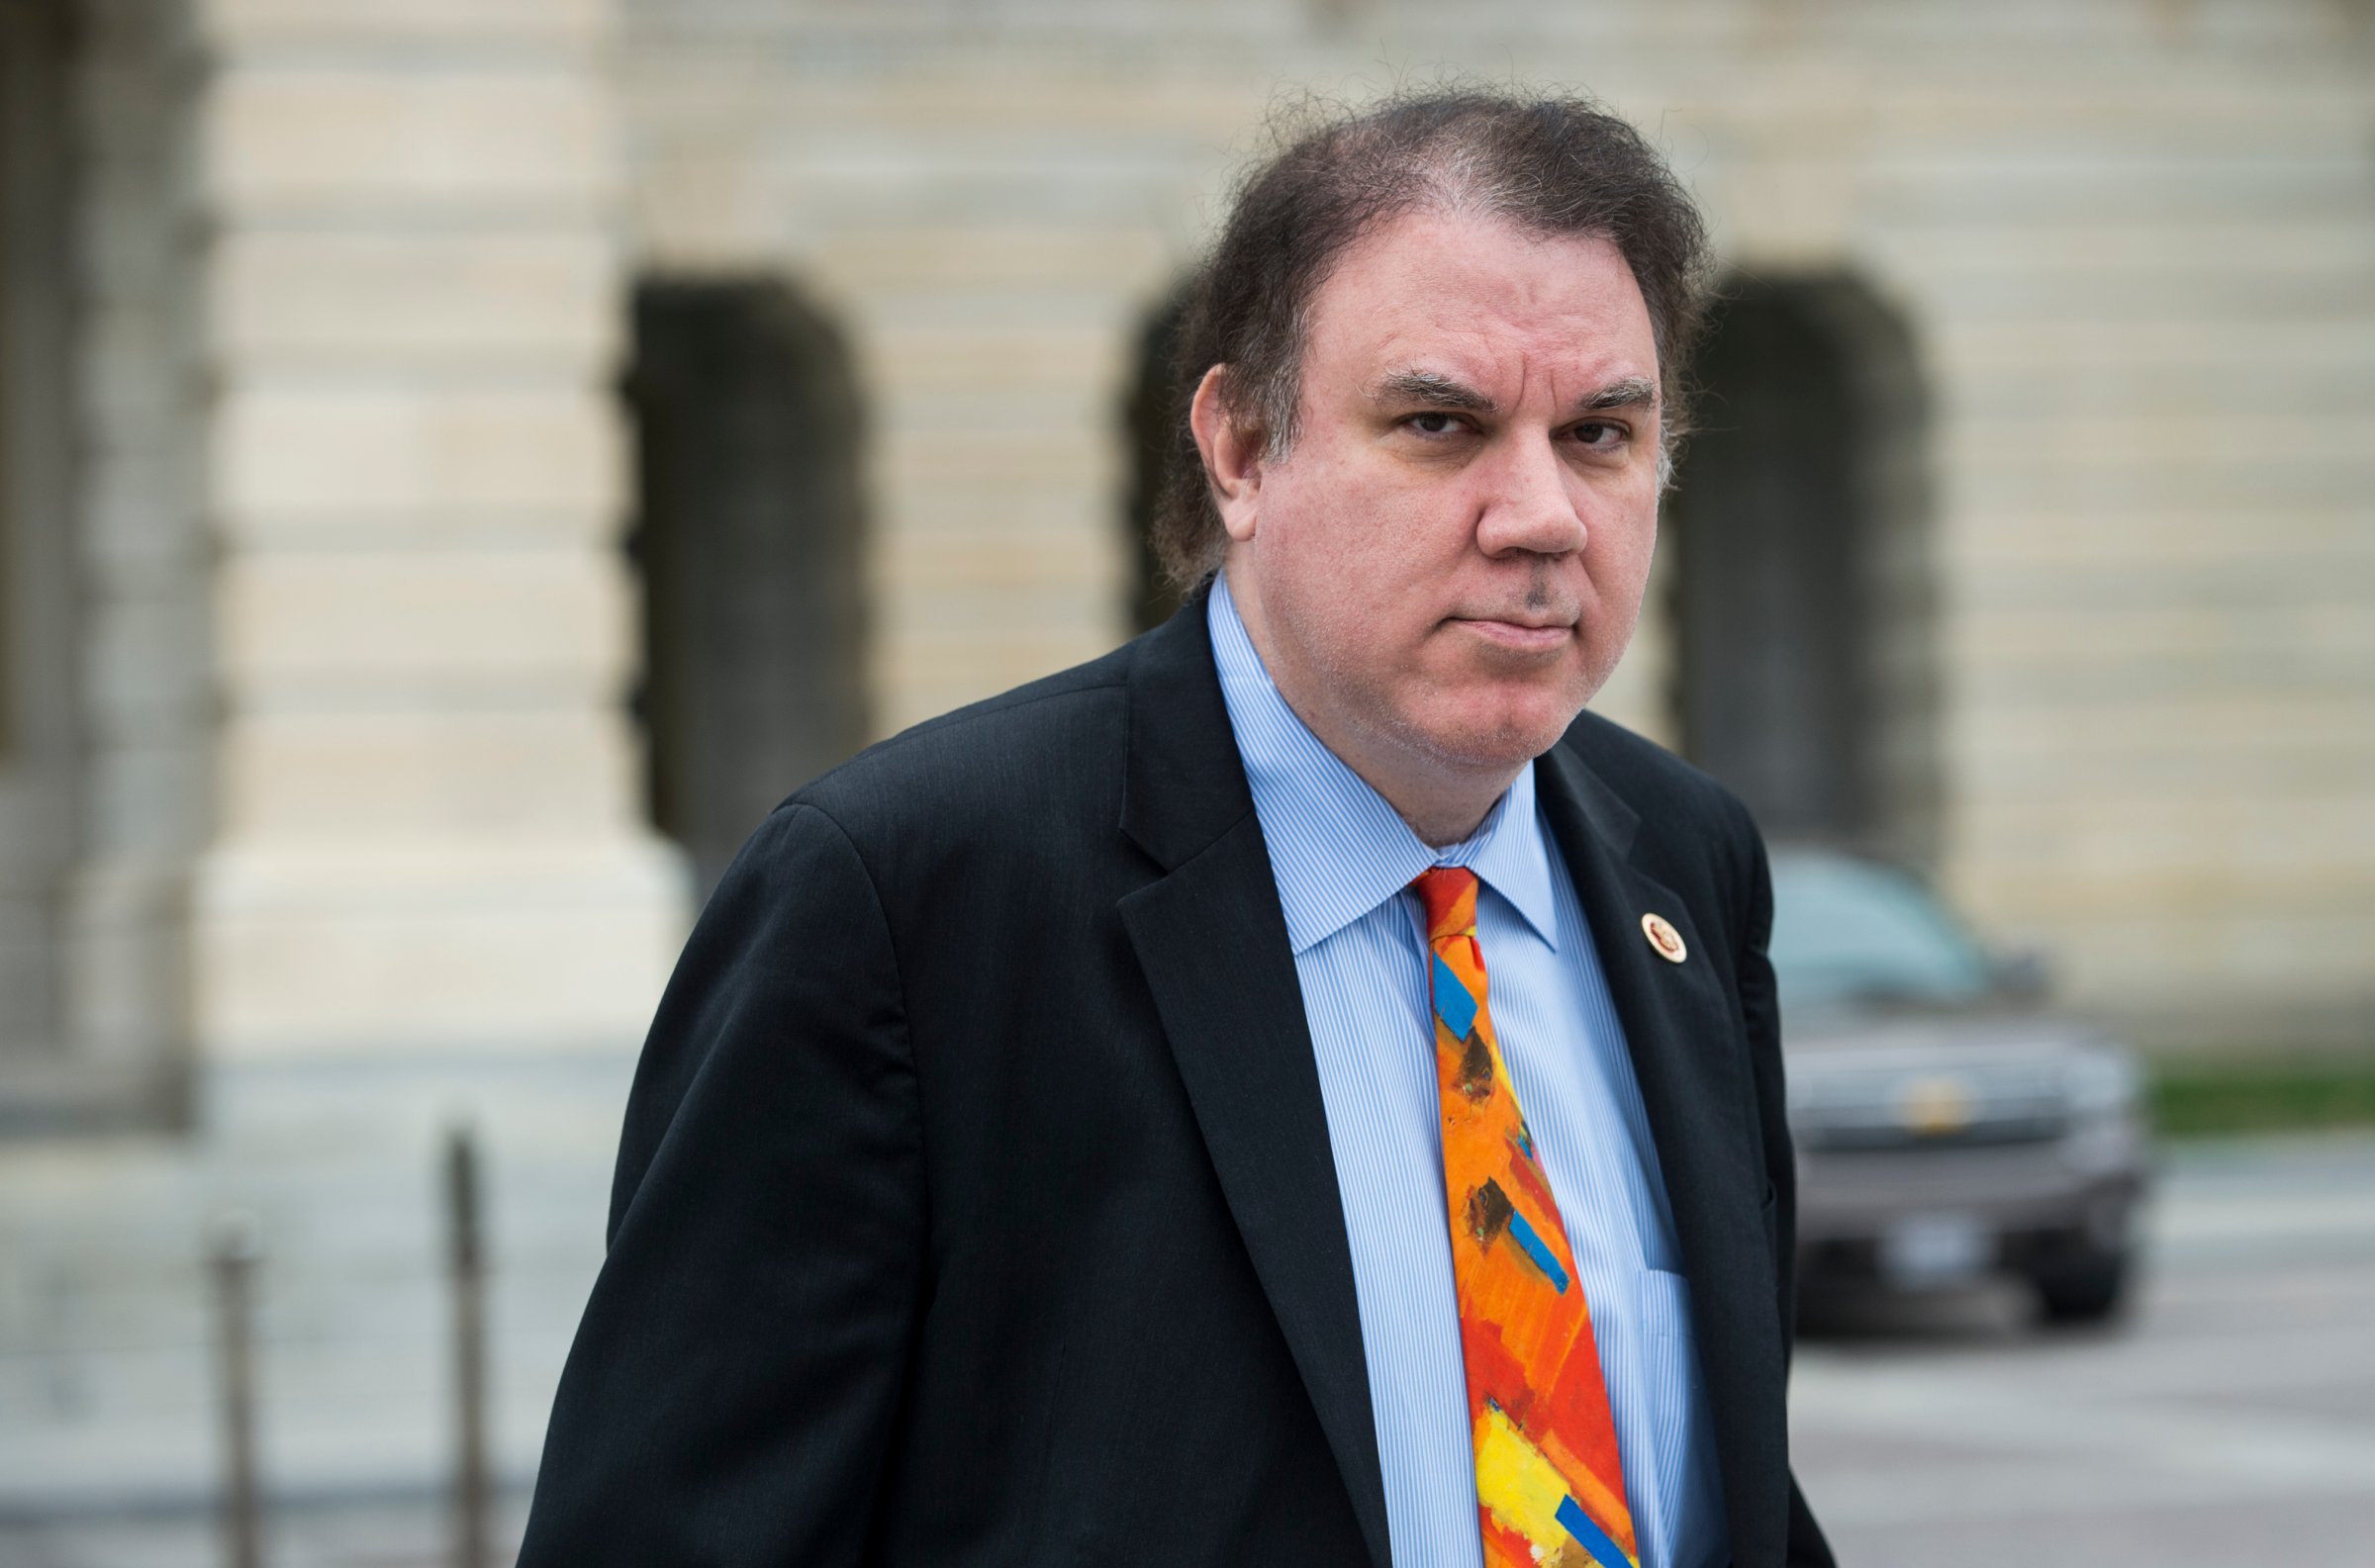 Rep. Alan Grayson, D-Fla., leaves the Capitol following the last vote of the week on Friday, April 4, 2014.